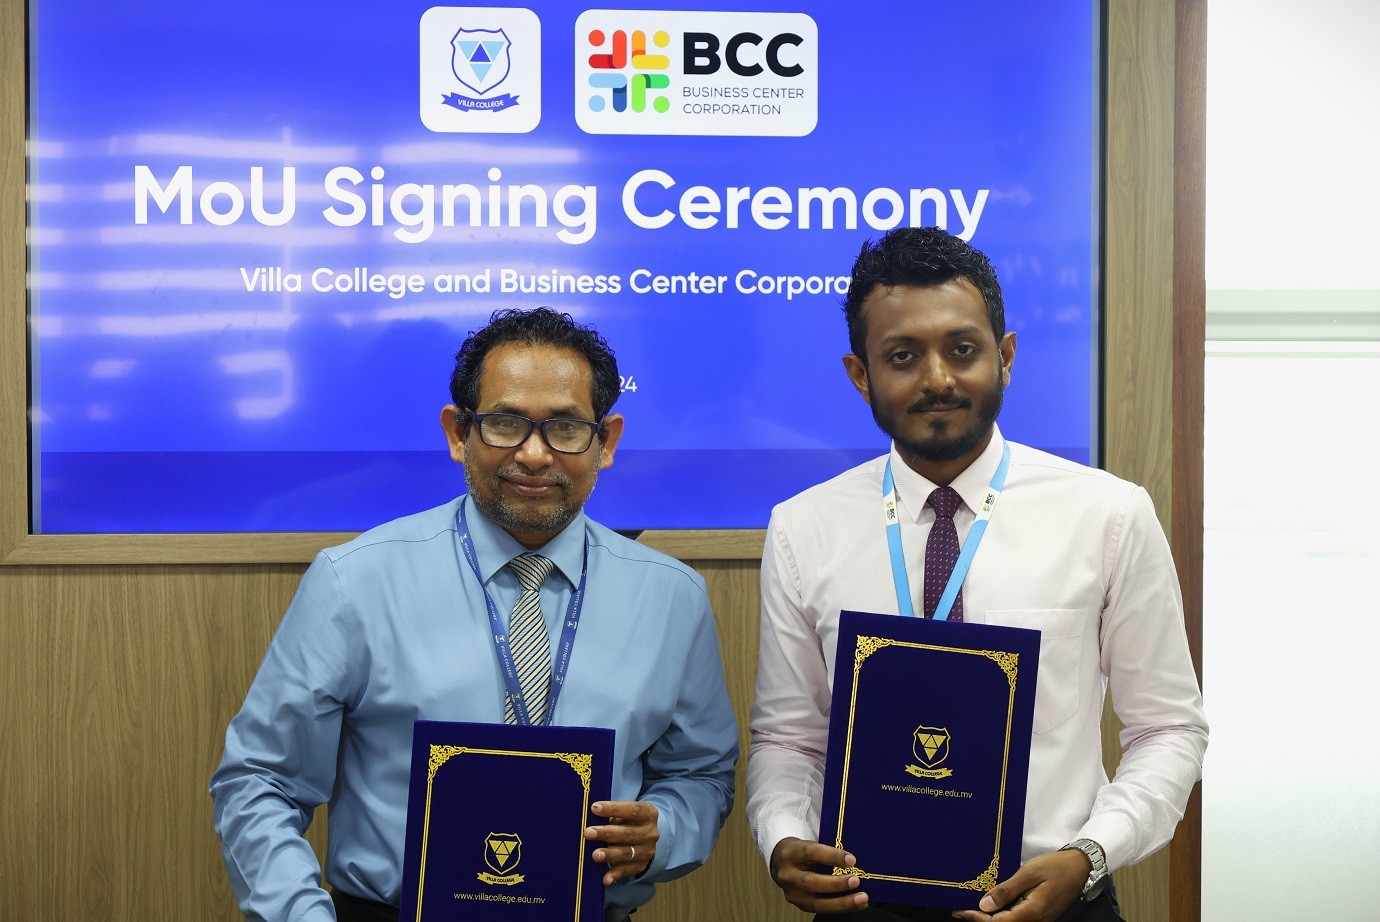 VILLA COLLEGE SIGNS MOU WITH BUSINESS CENTER CORPORATION (BCC)